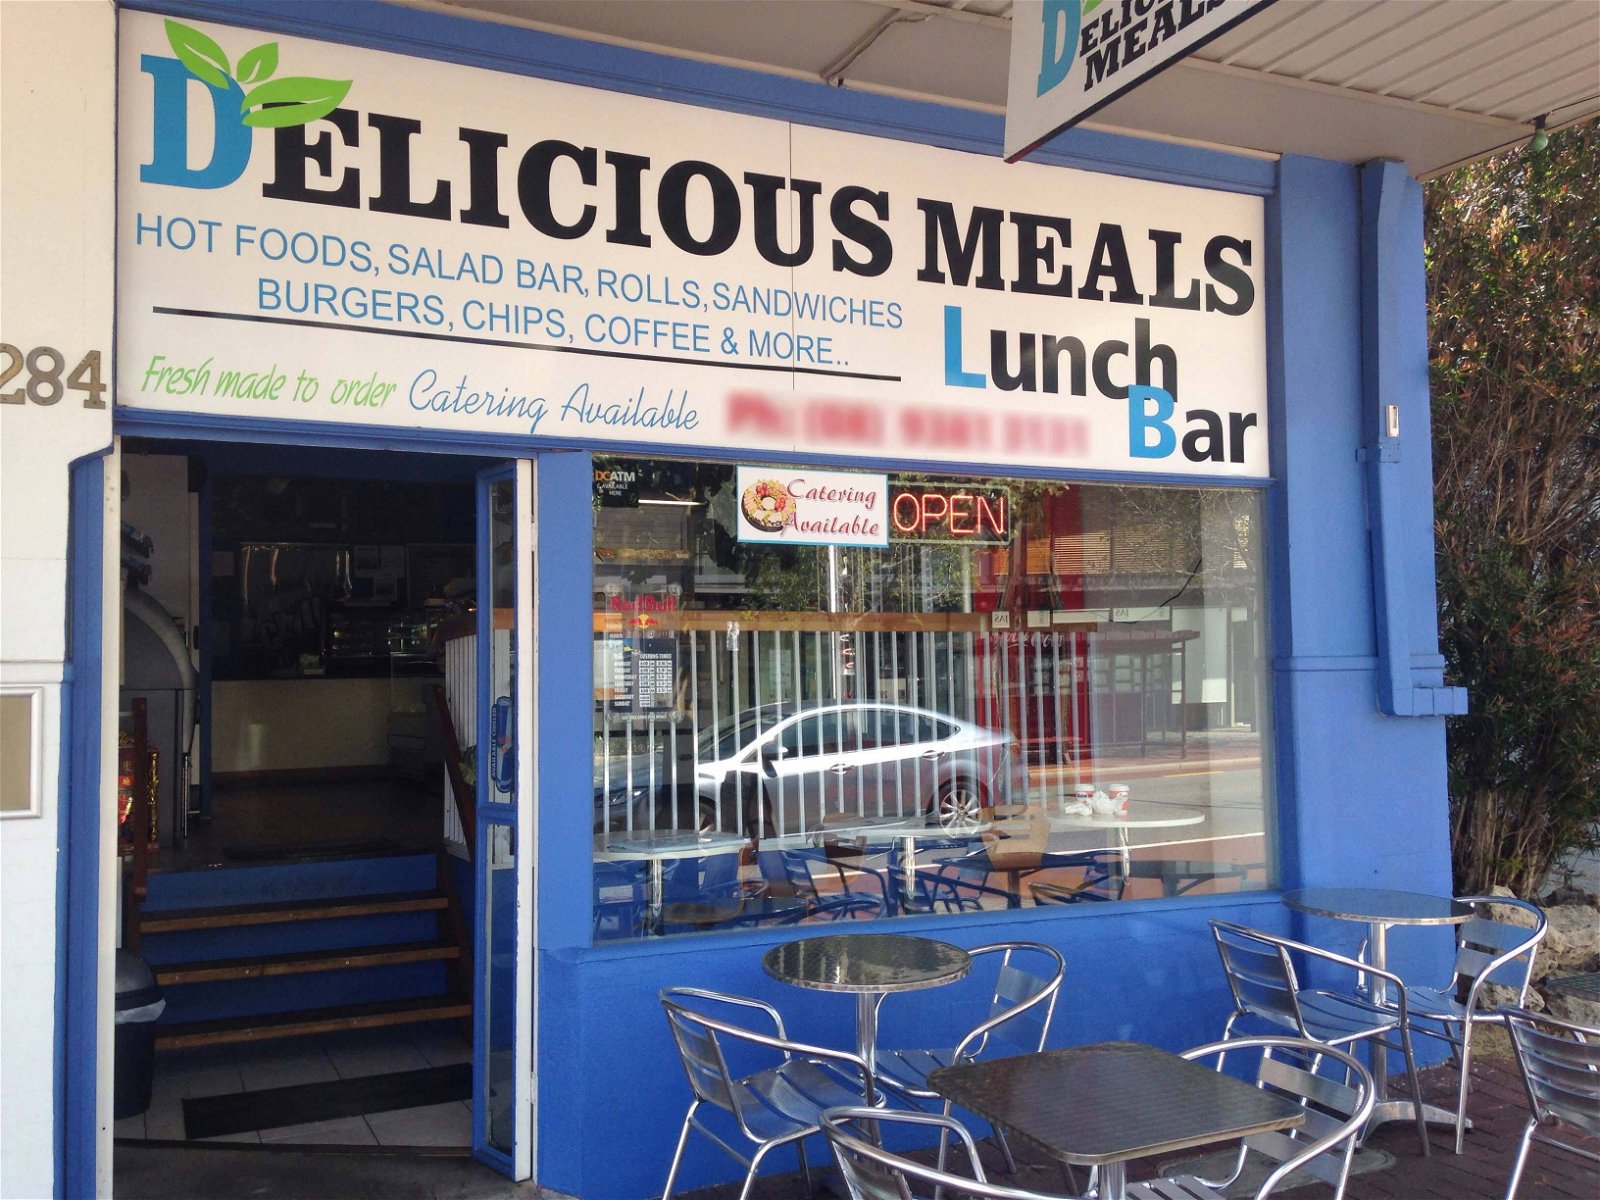 Delicious Meals Lunchbar - Northern Rivers Accommodation